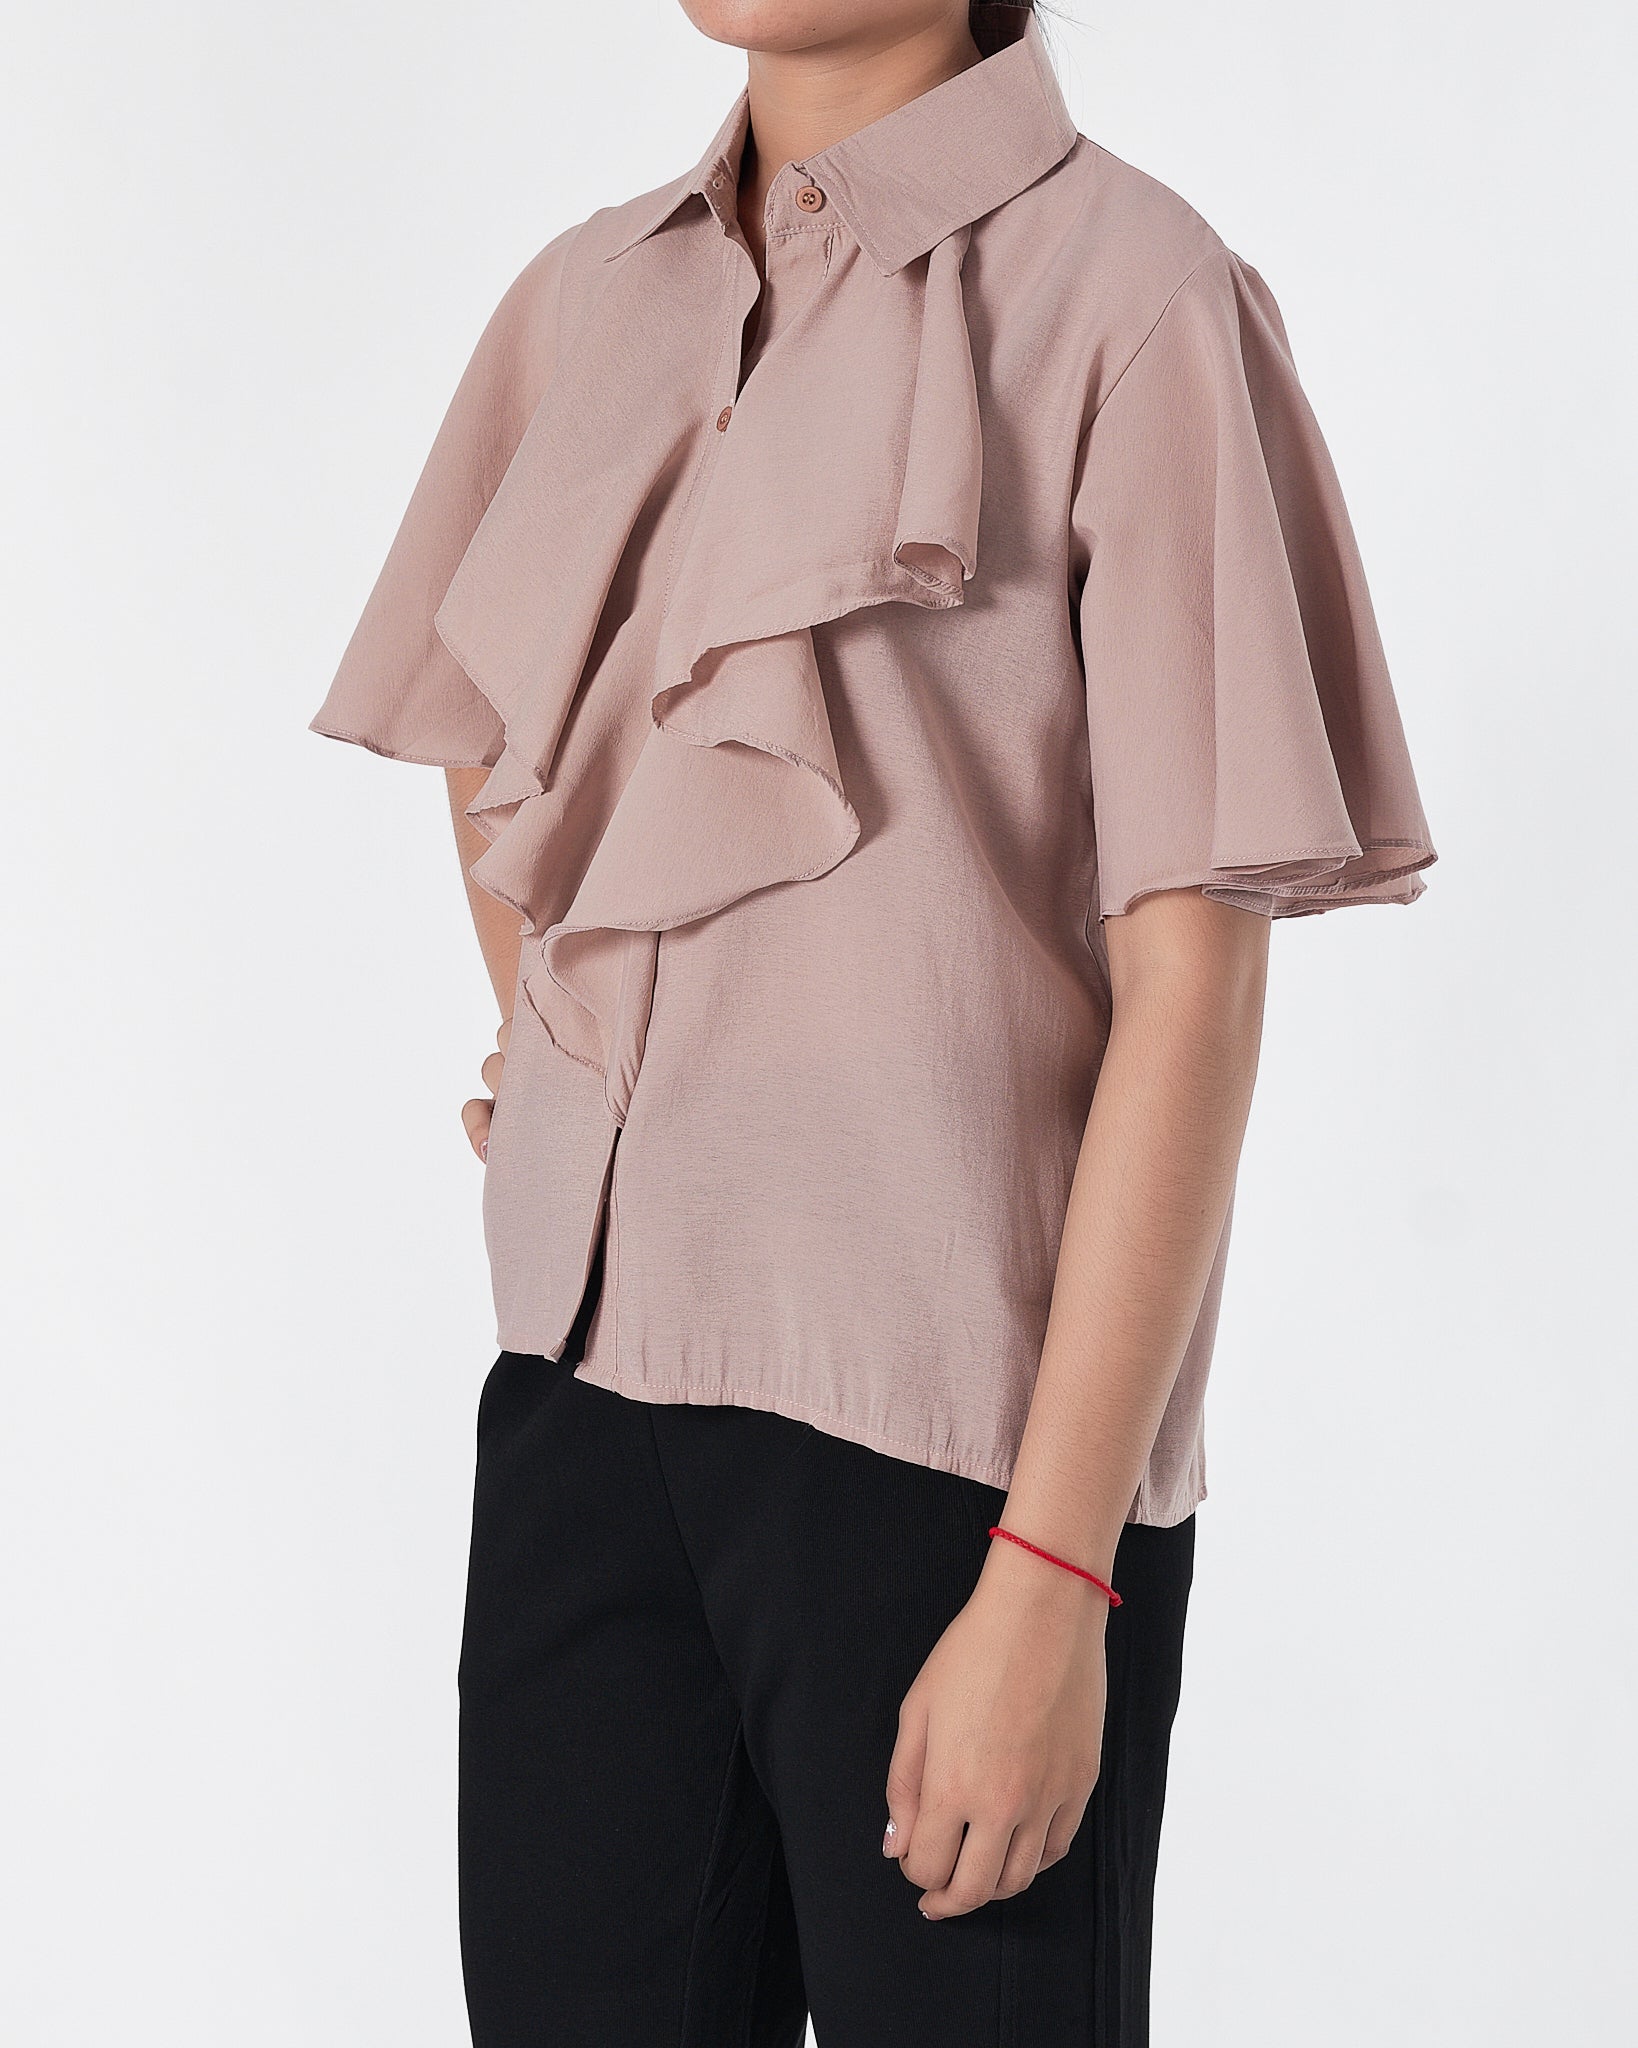 Lady Coral  Blouse 14.90